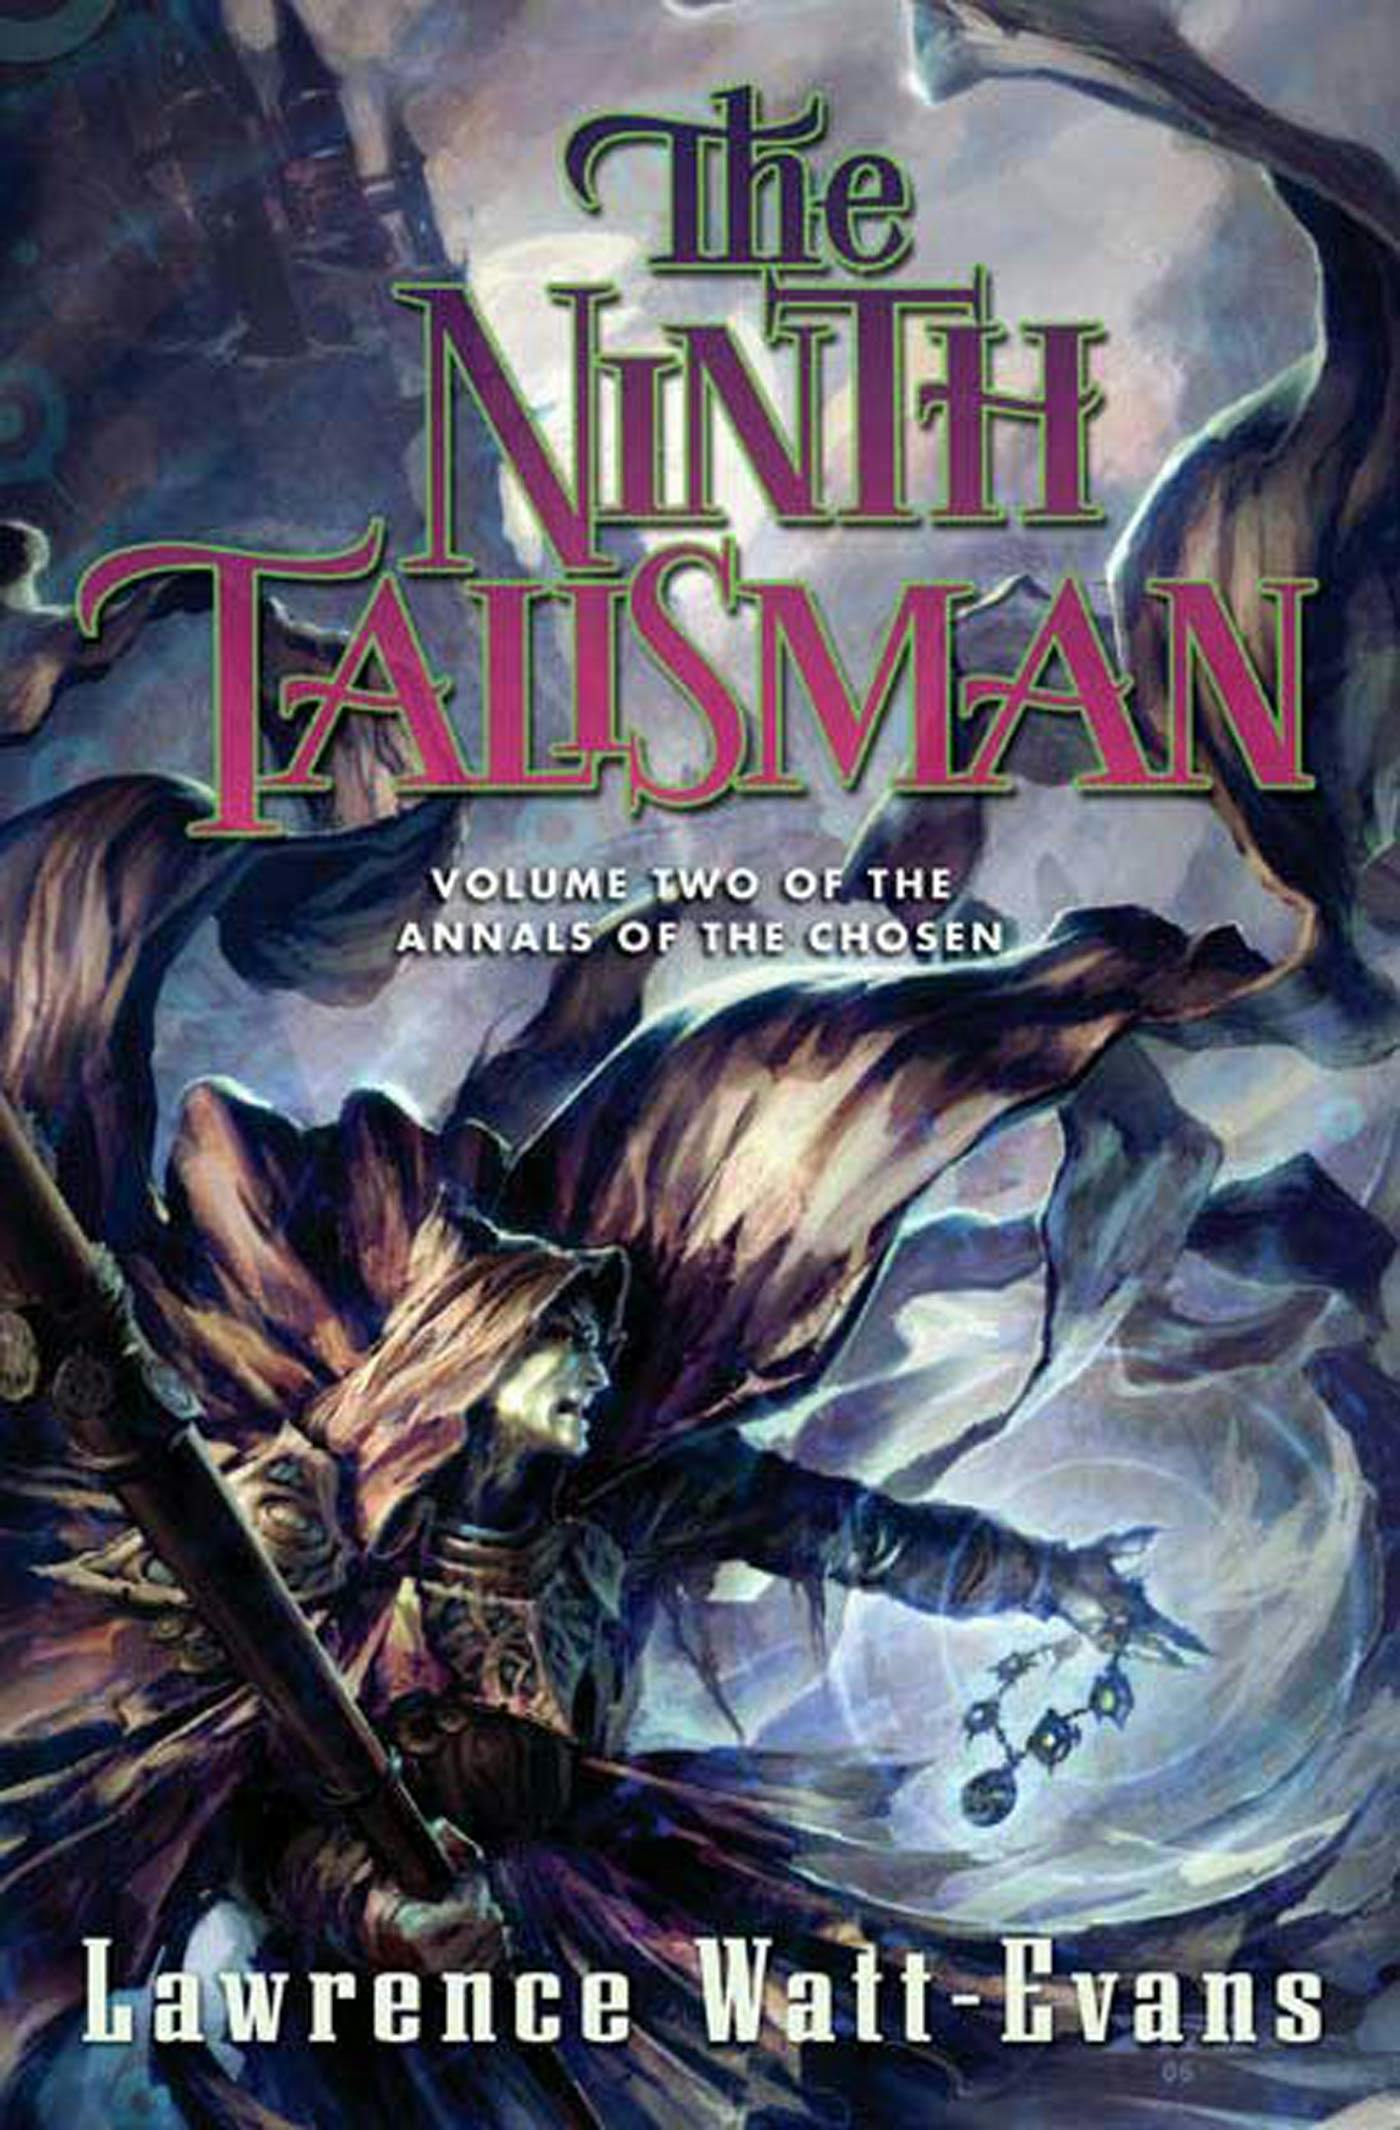 Cover for the book titled as: The Ninth Talisman